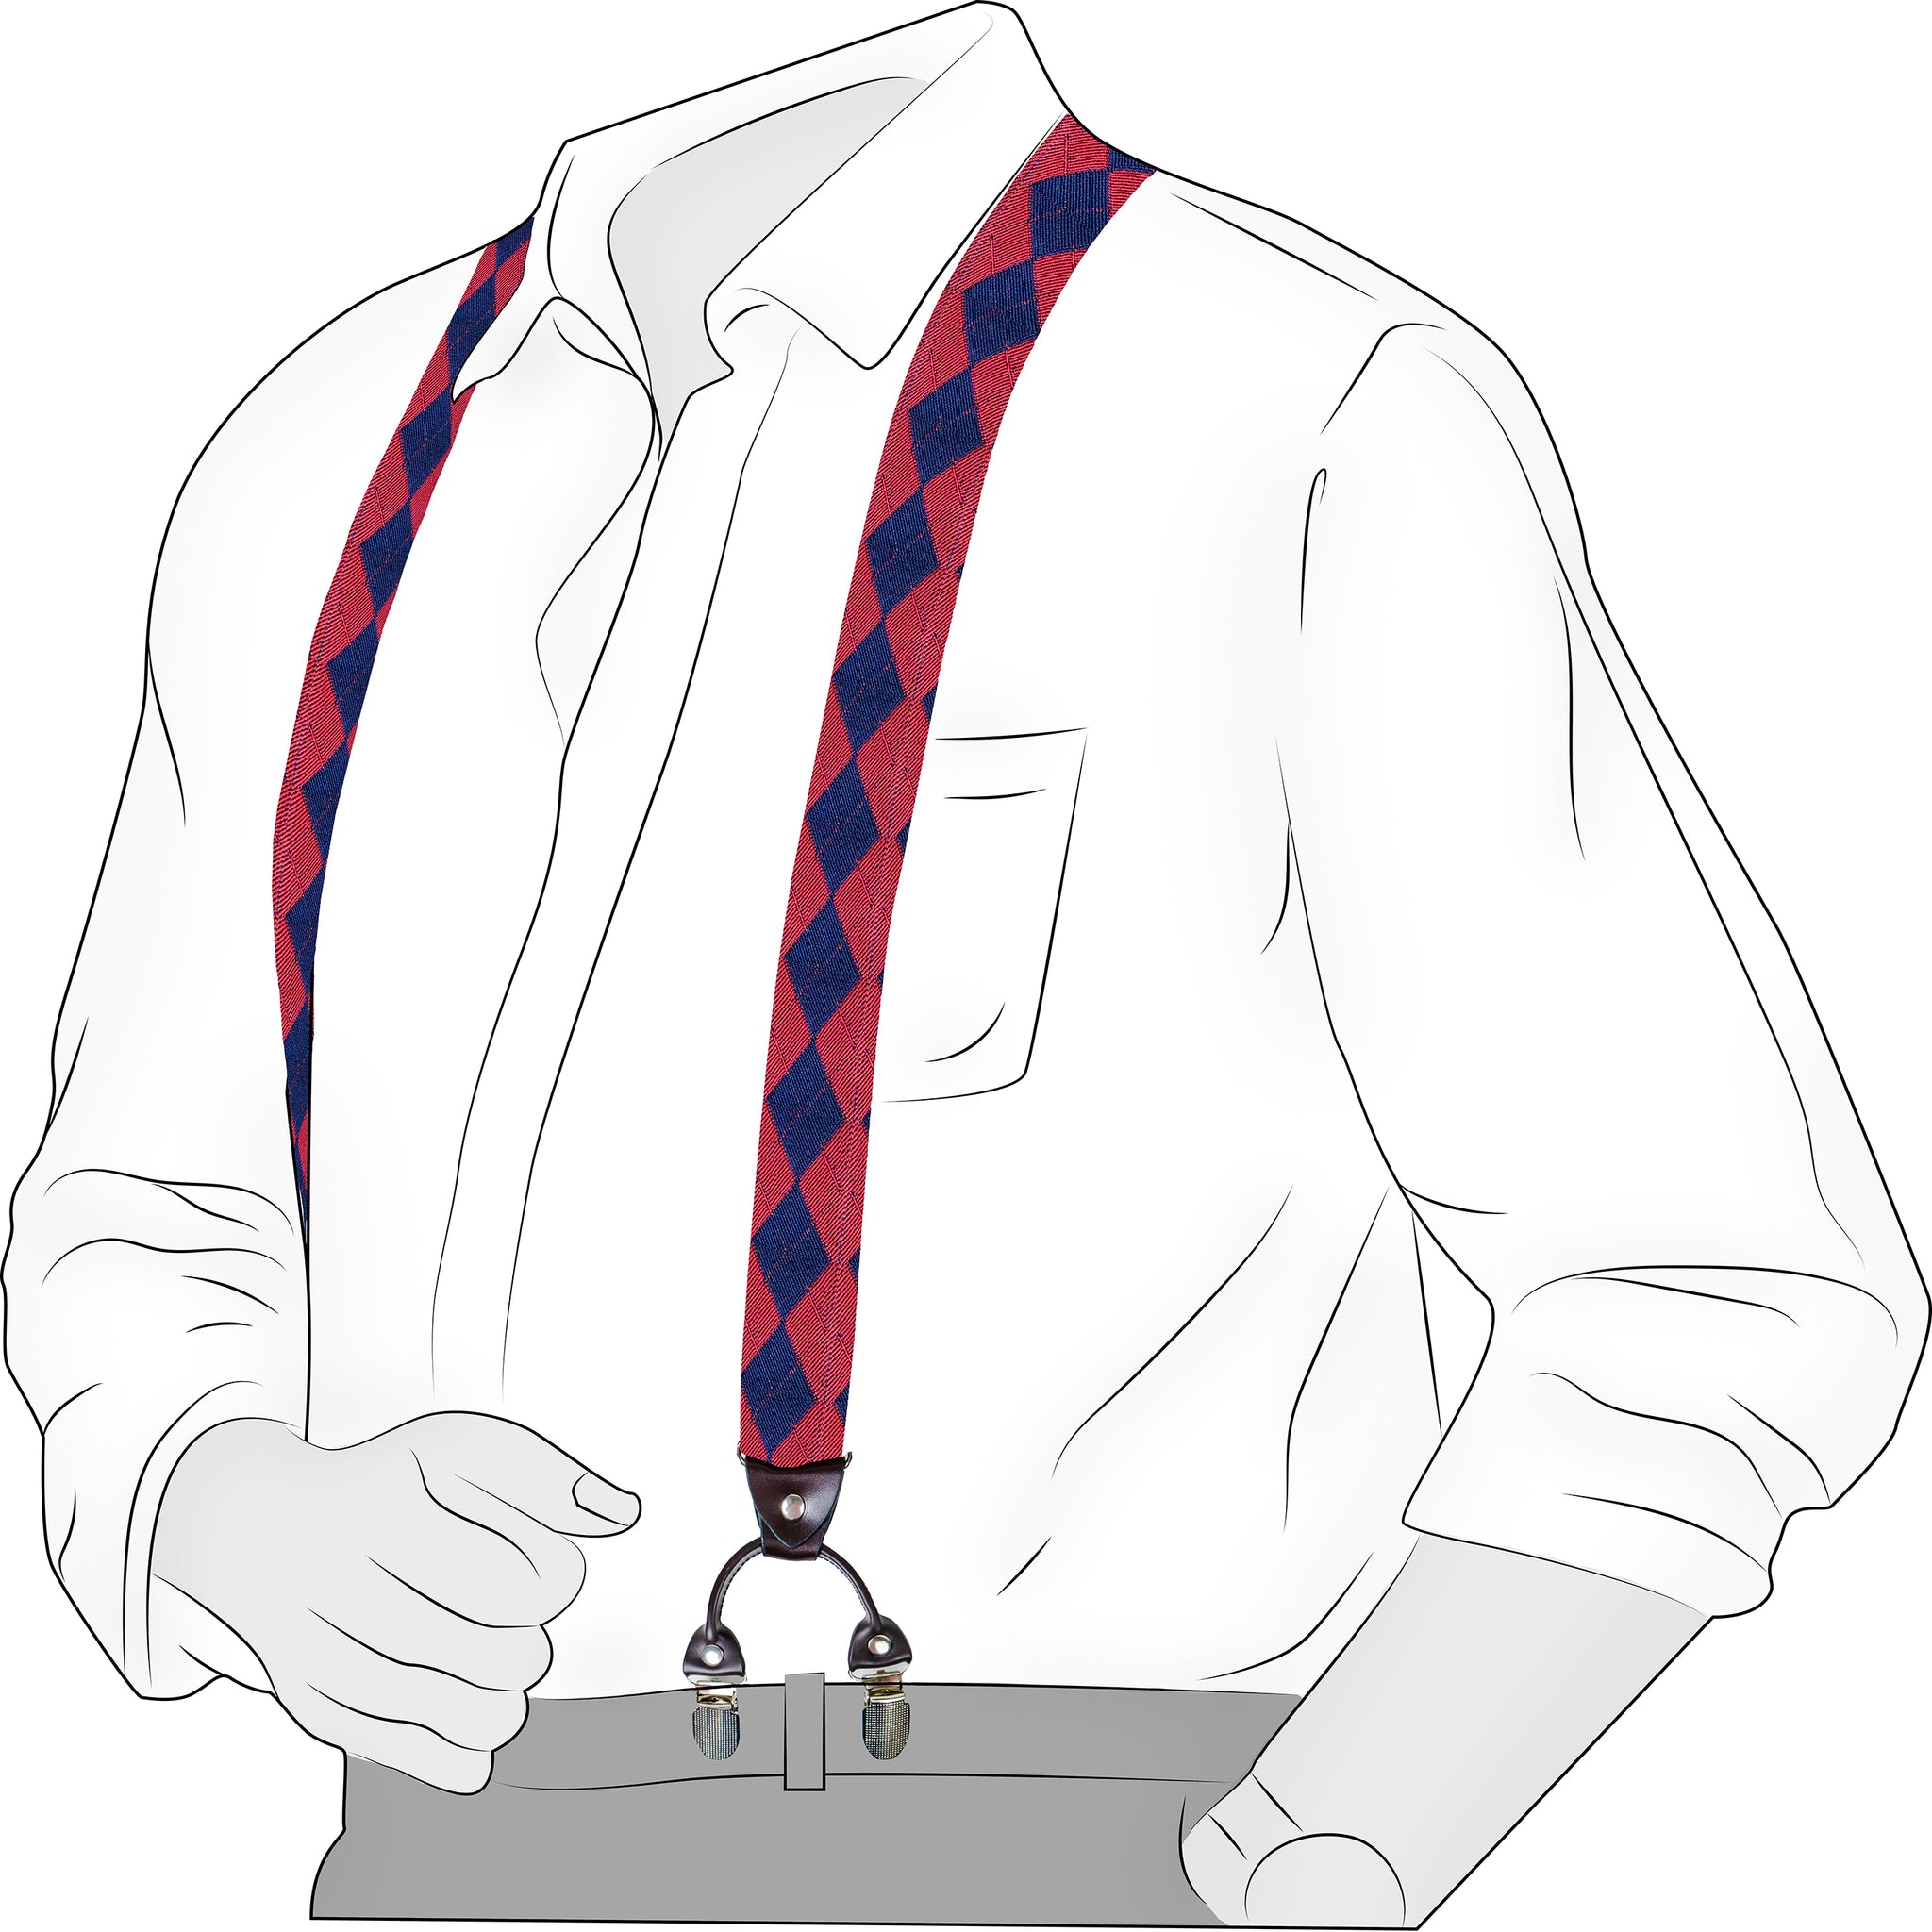 Chokore Stretchy Y-shaped Suspenders with 6-clips (Navy Blue & Red)